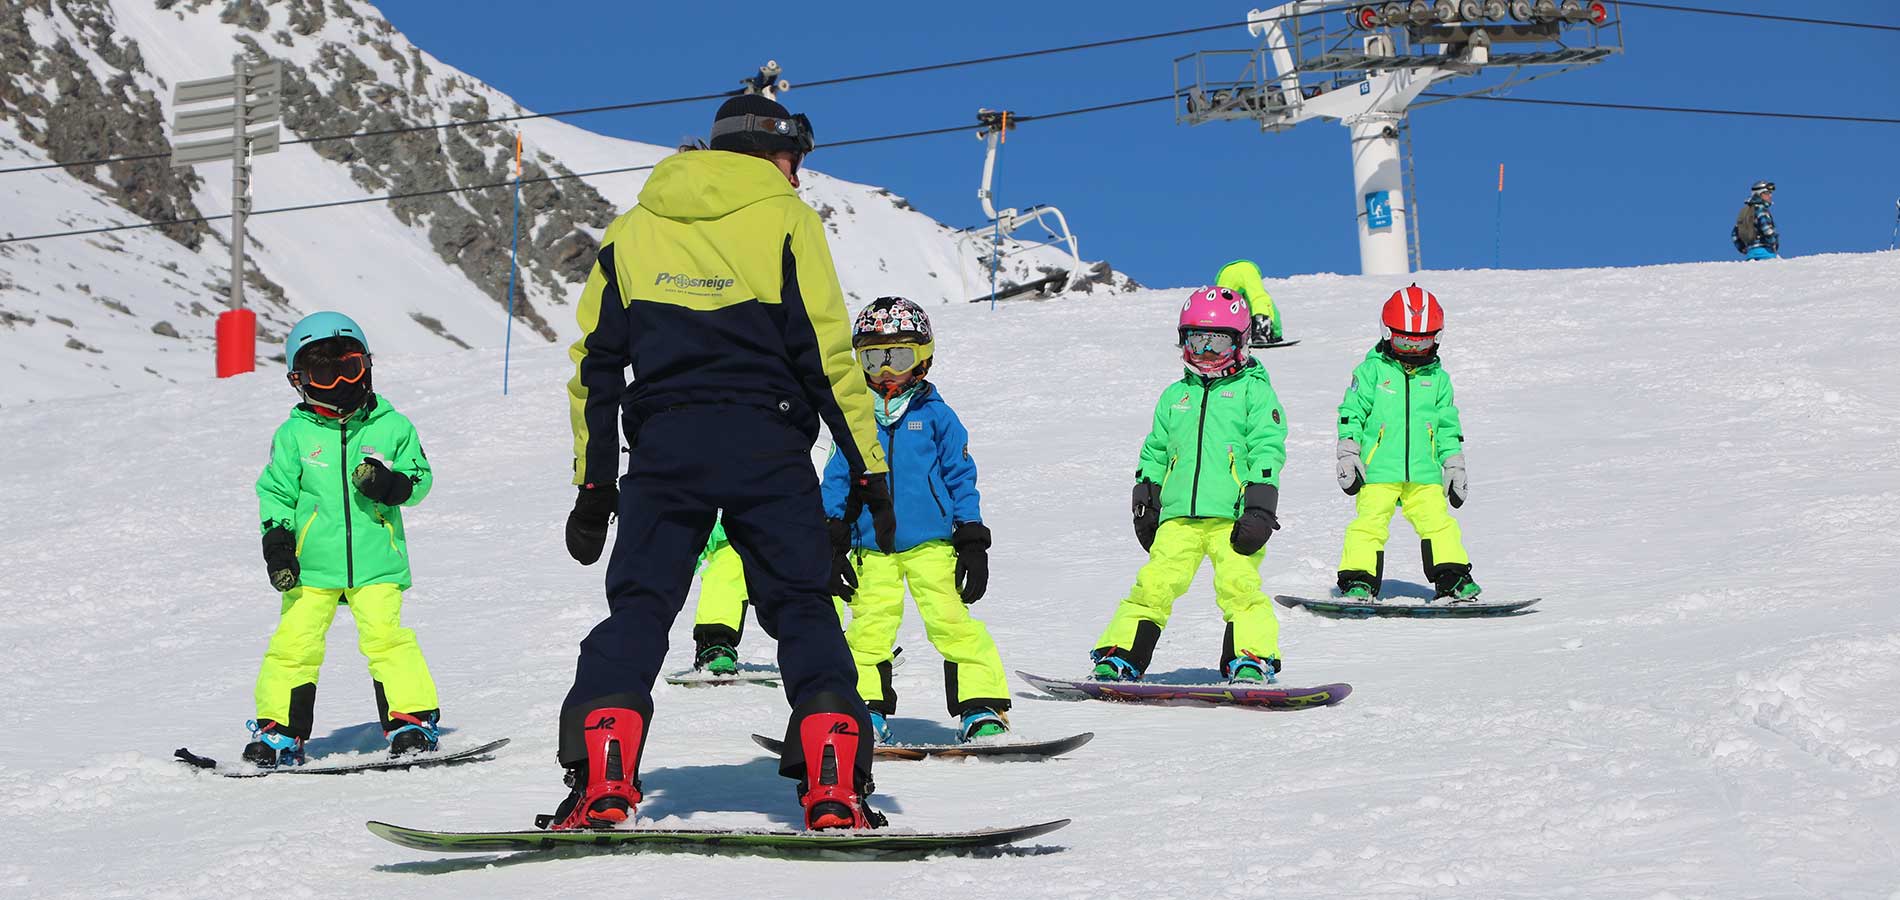 snowboard group lessons children